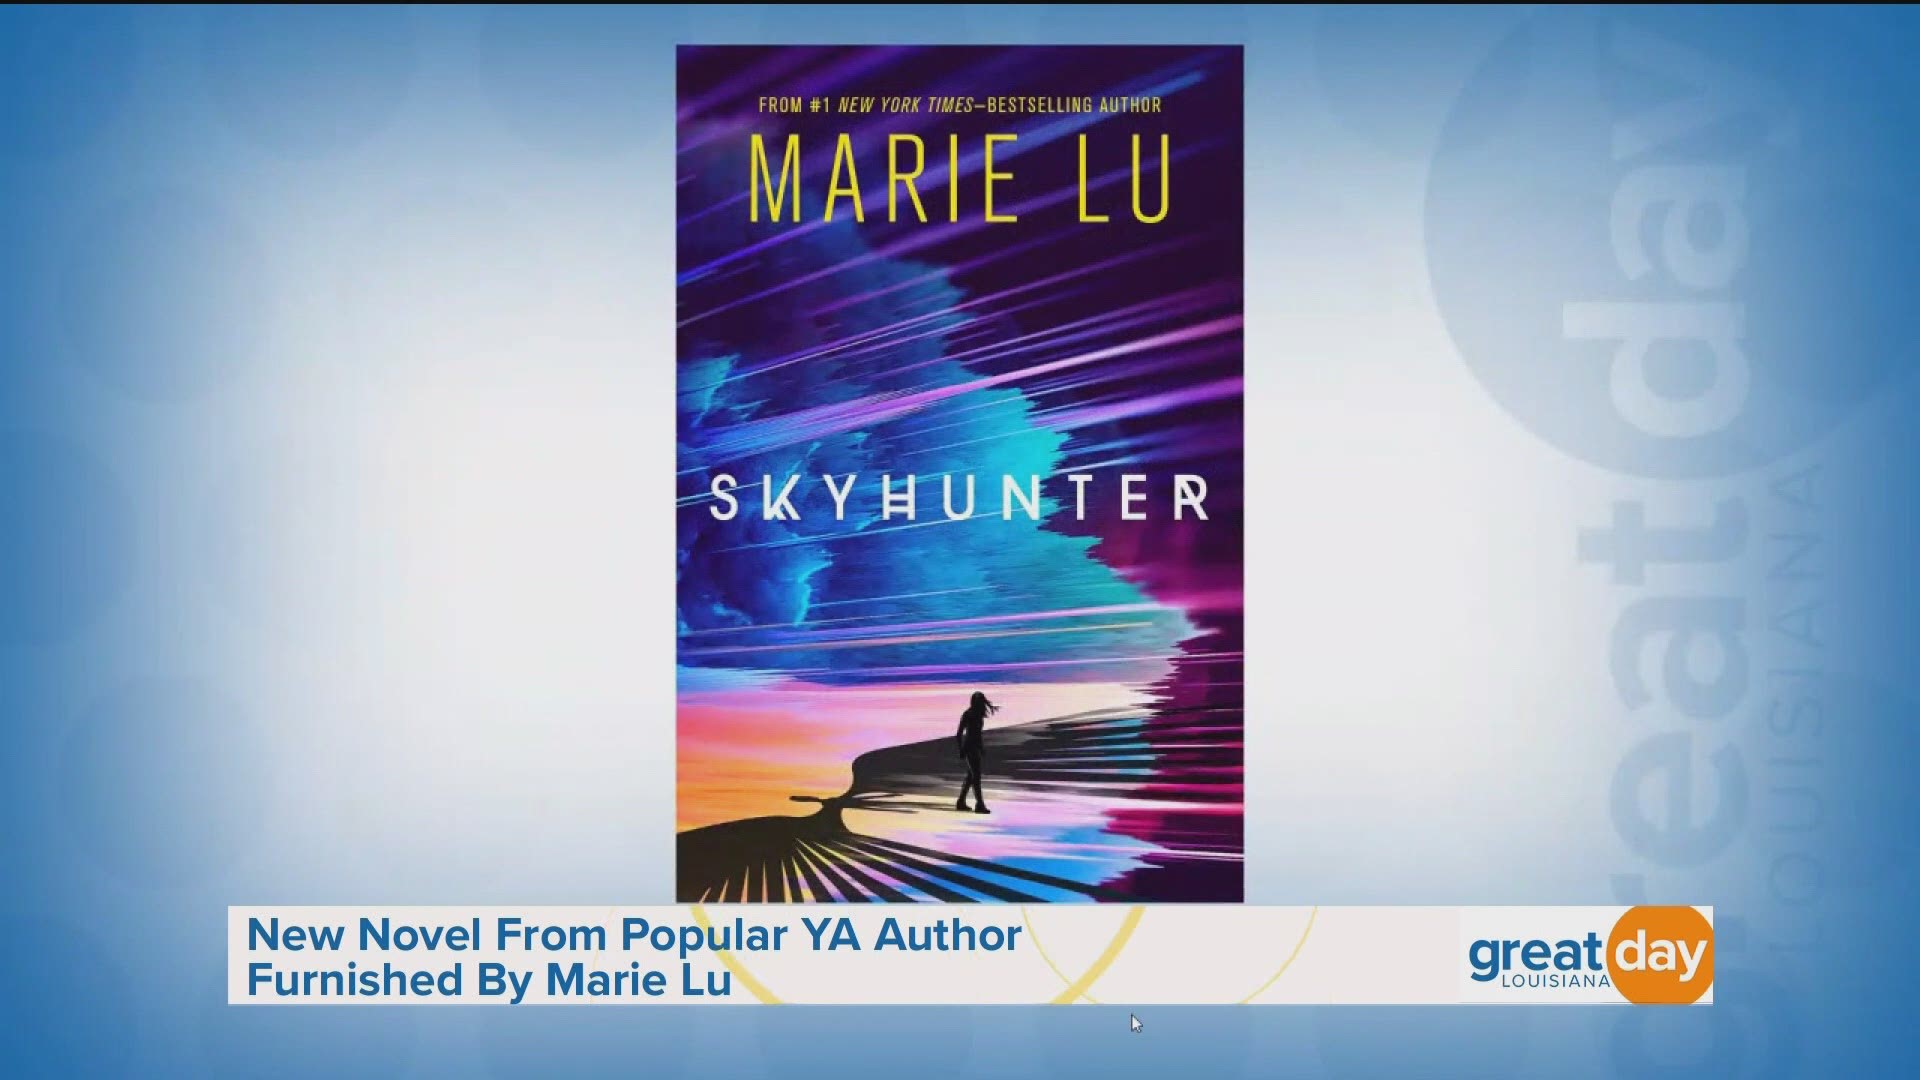 "Skyhunter" is available now wherever books are sold.